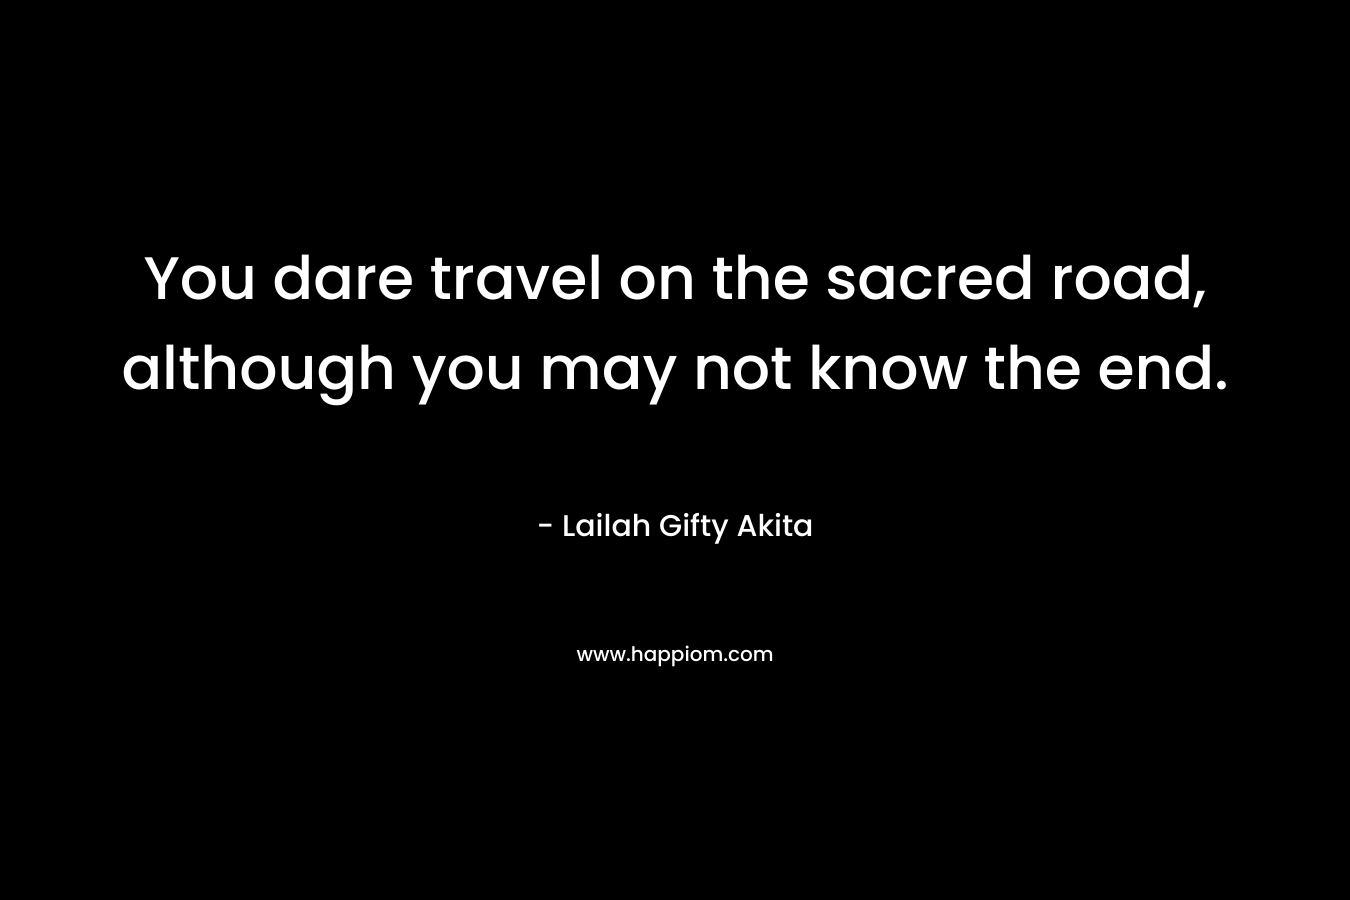 You dare travel on the sacred road, although you may not know the end.